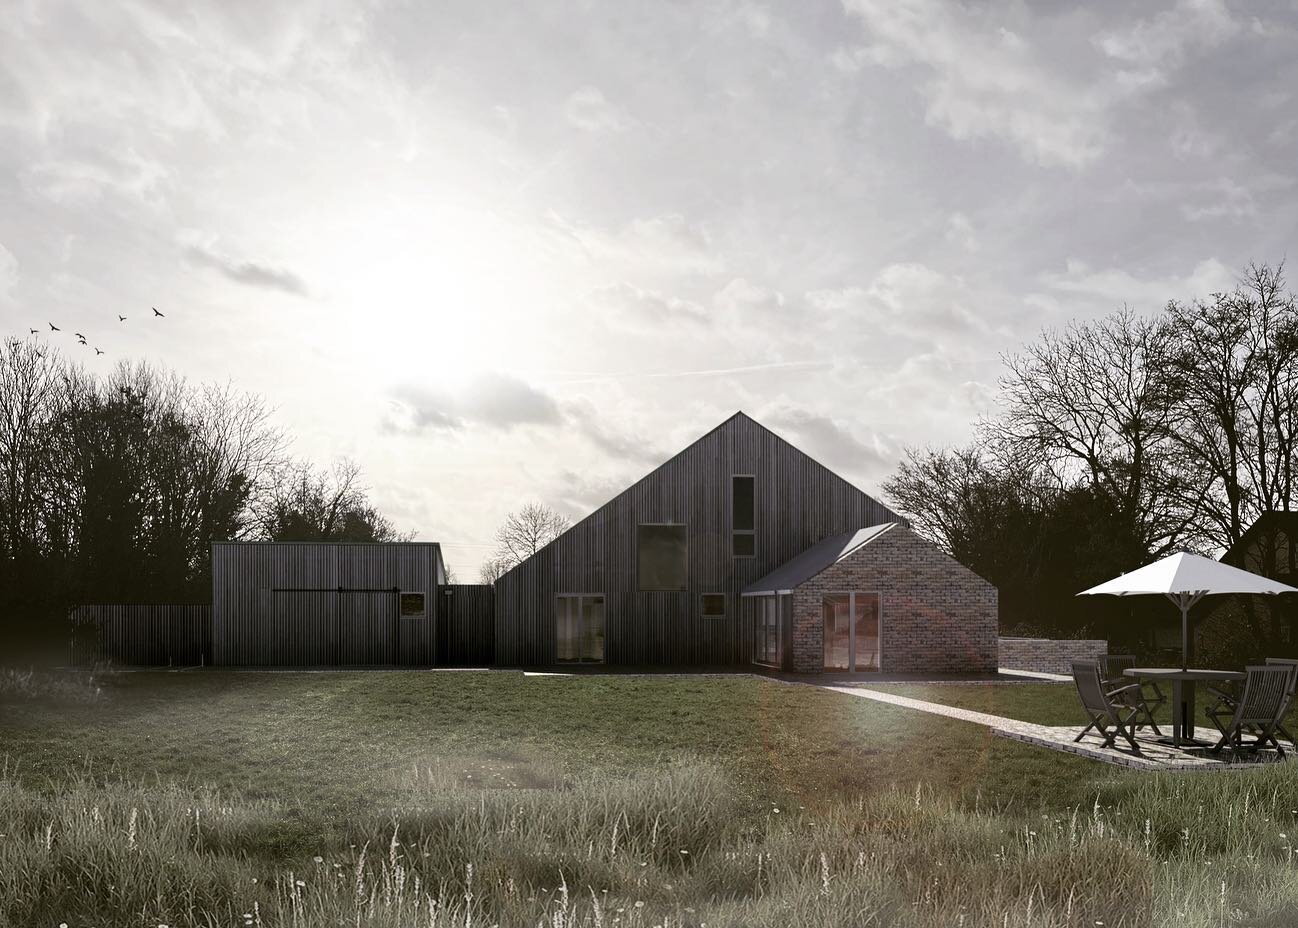 We are very pleased to announce that we have submitted this design for planning today, for a new eco dwelling and biodiversity improvement strategy in Aldreth, Cambridgeshire. The project takes reference from surrounding agricultural barns, which are